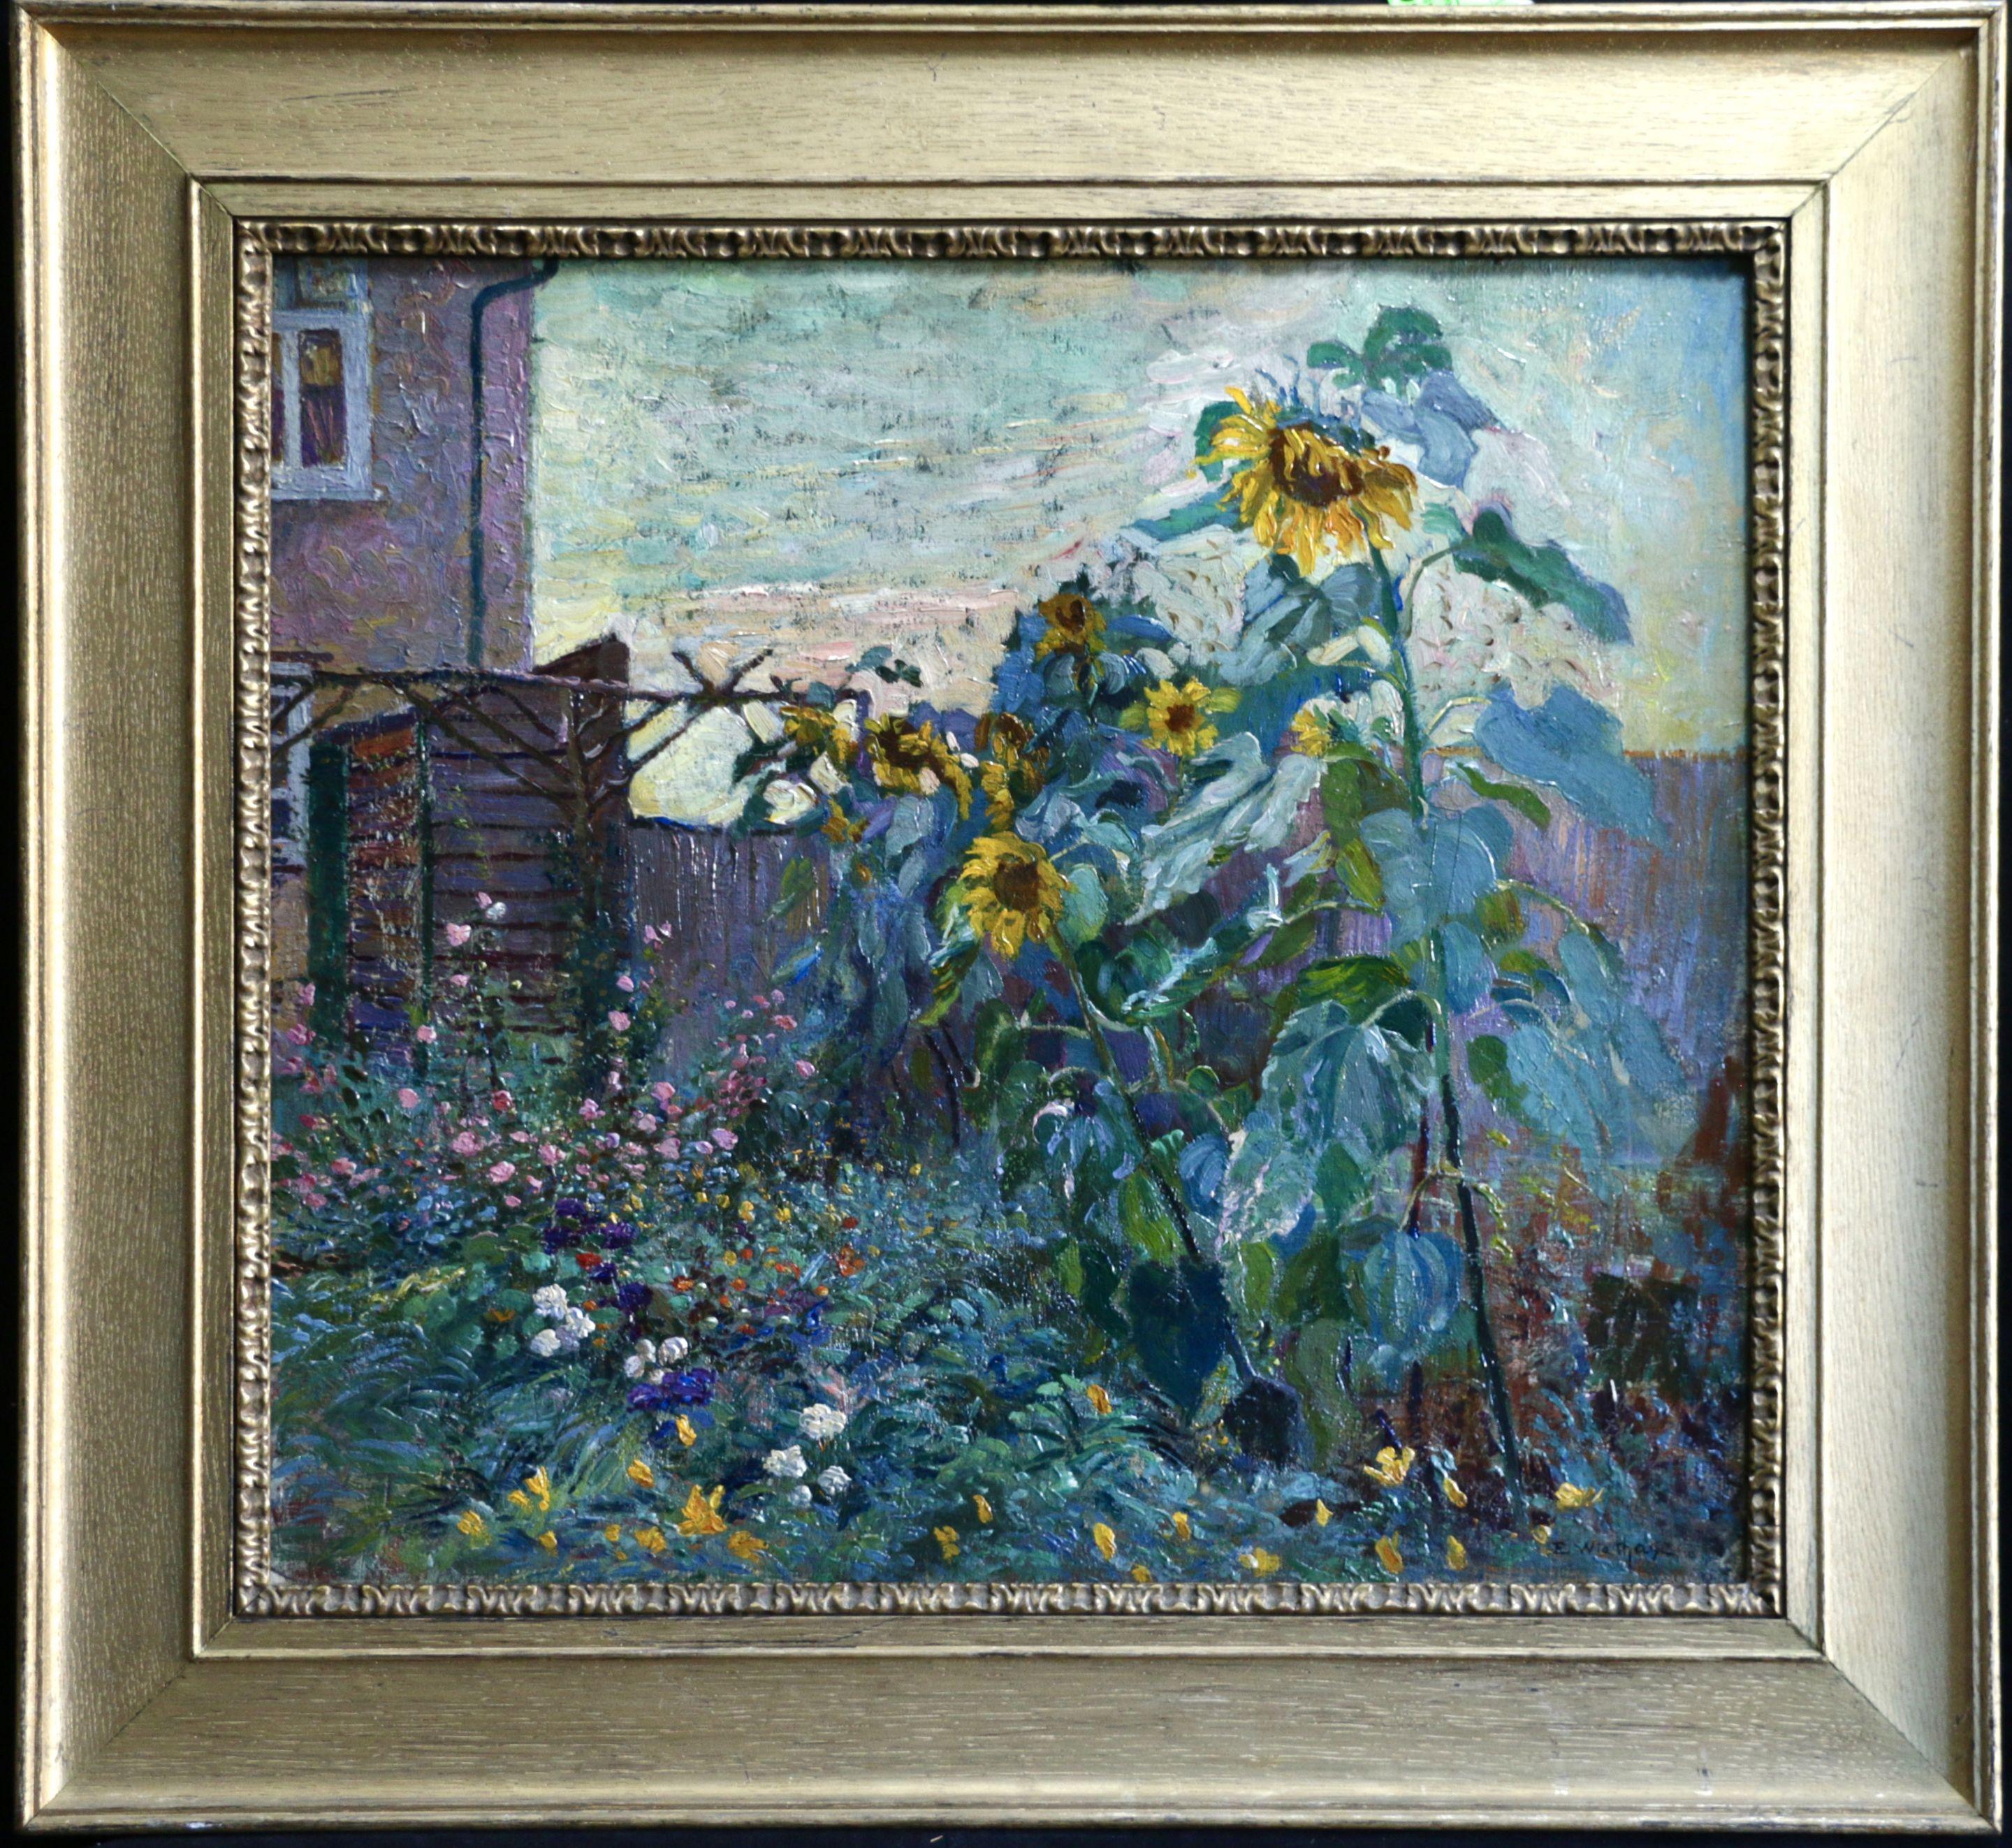 Sunflowers, Early 20th Century Belgian Post-Impressionist Flowers Landscape - Painting by Edgard Wiethase